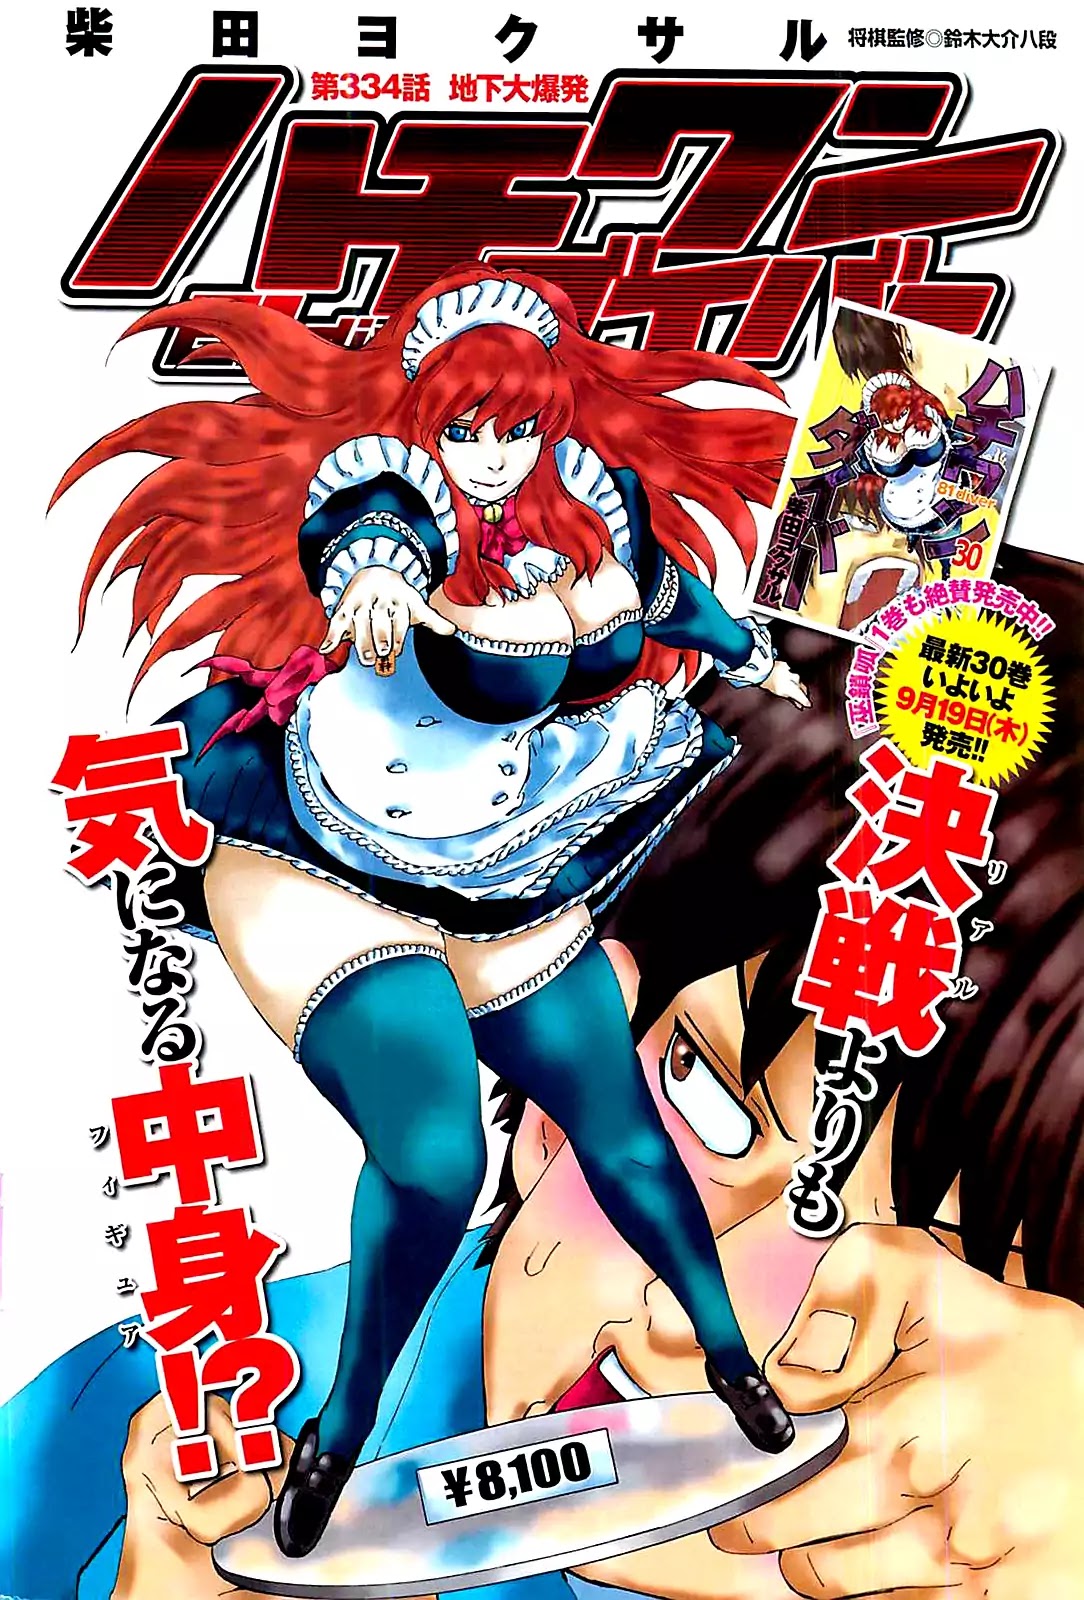 81 Diver Chapter 334 #2